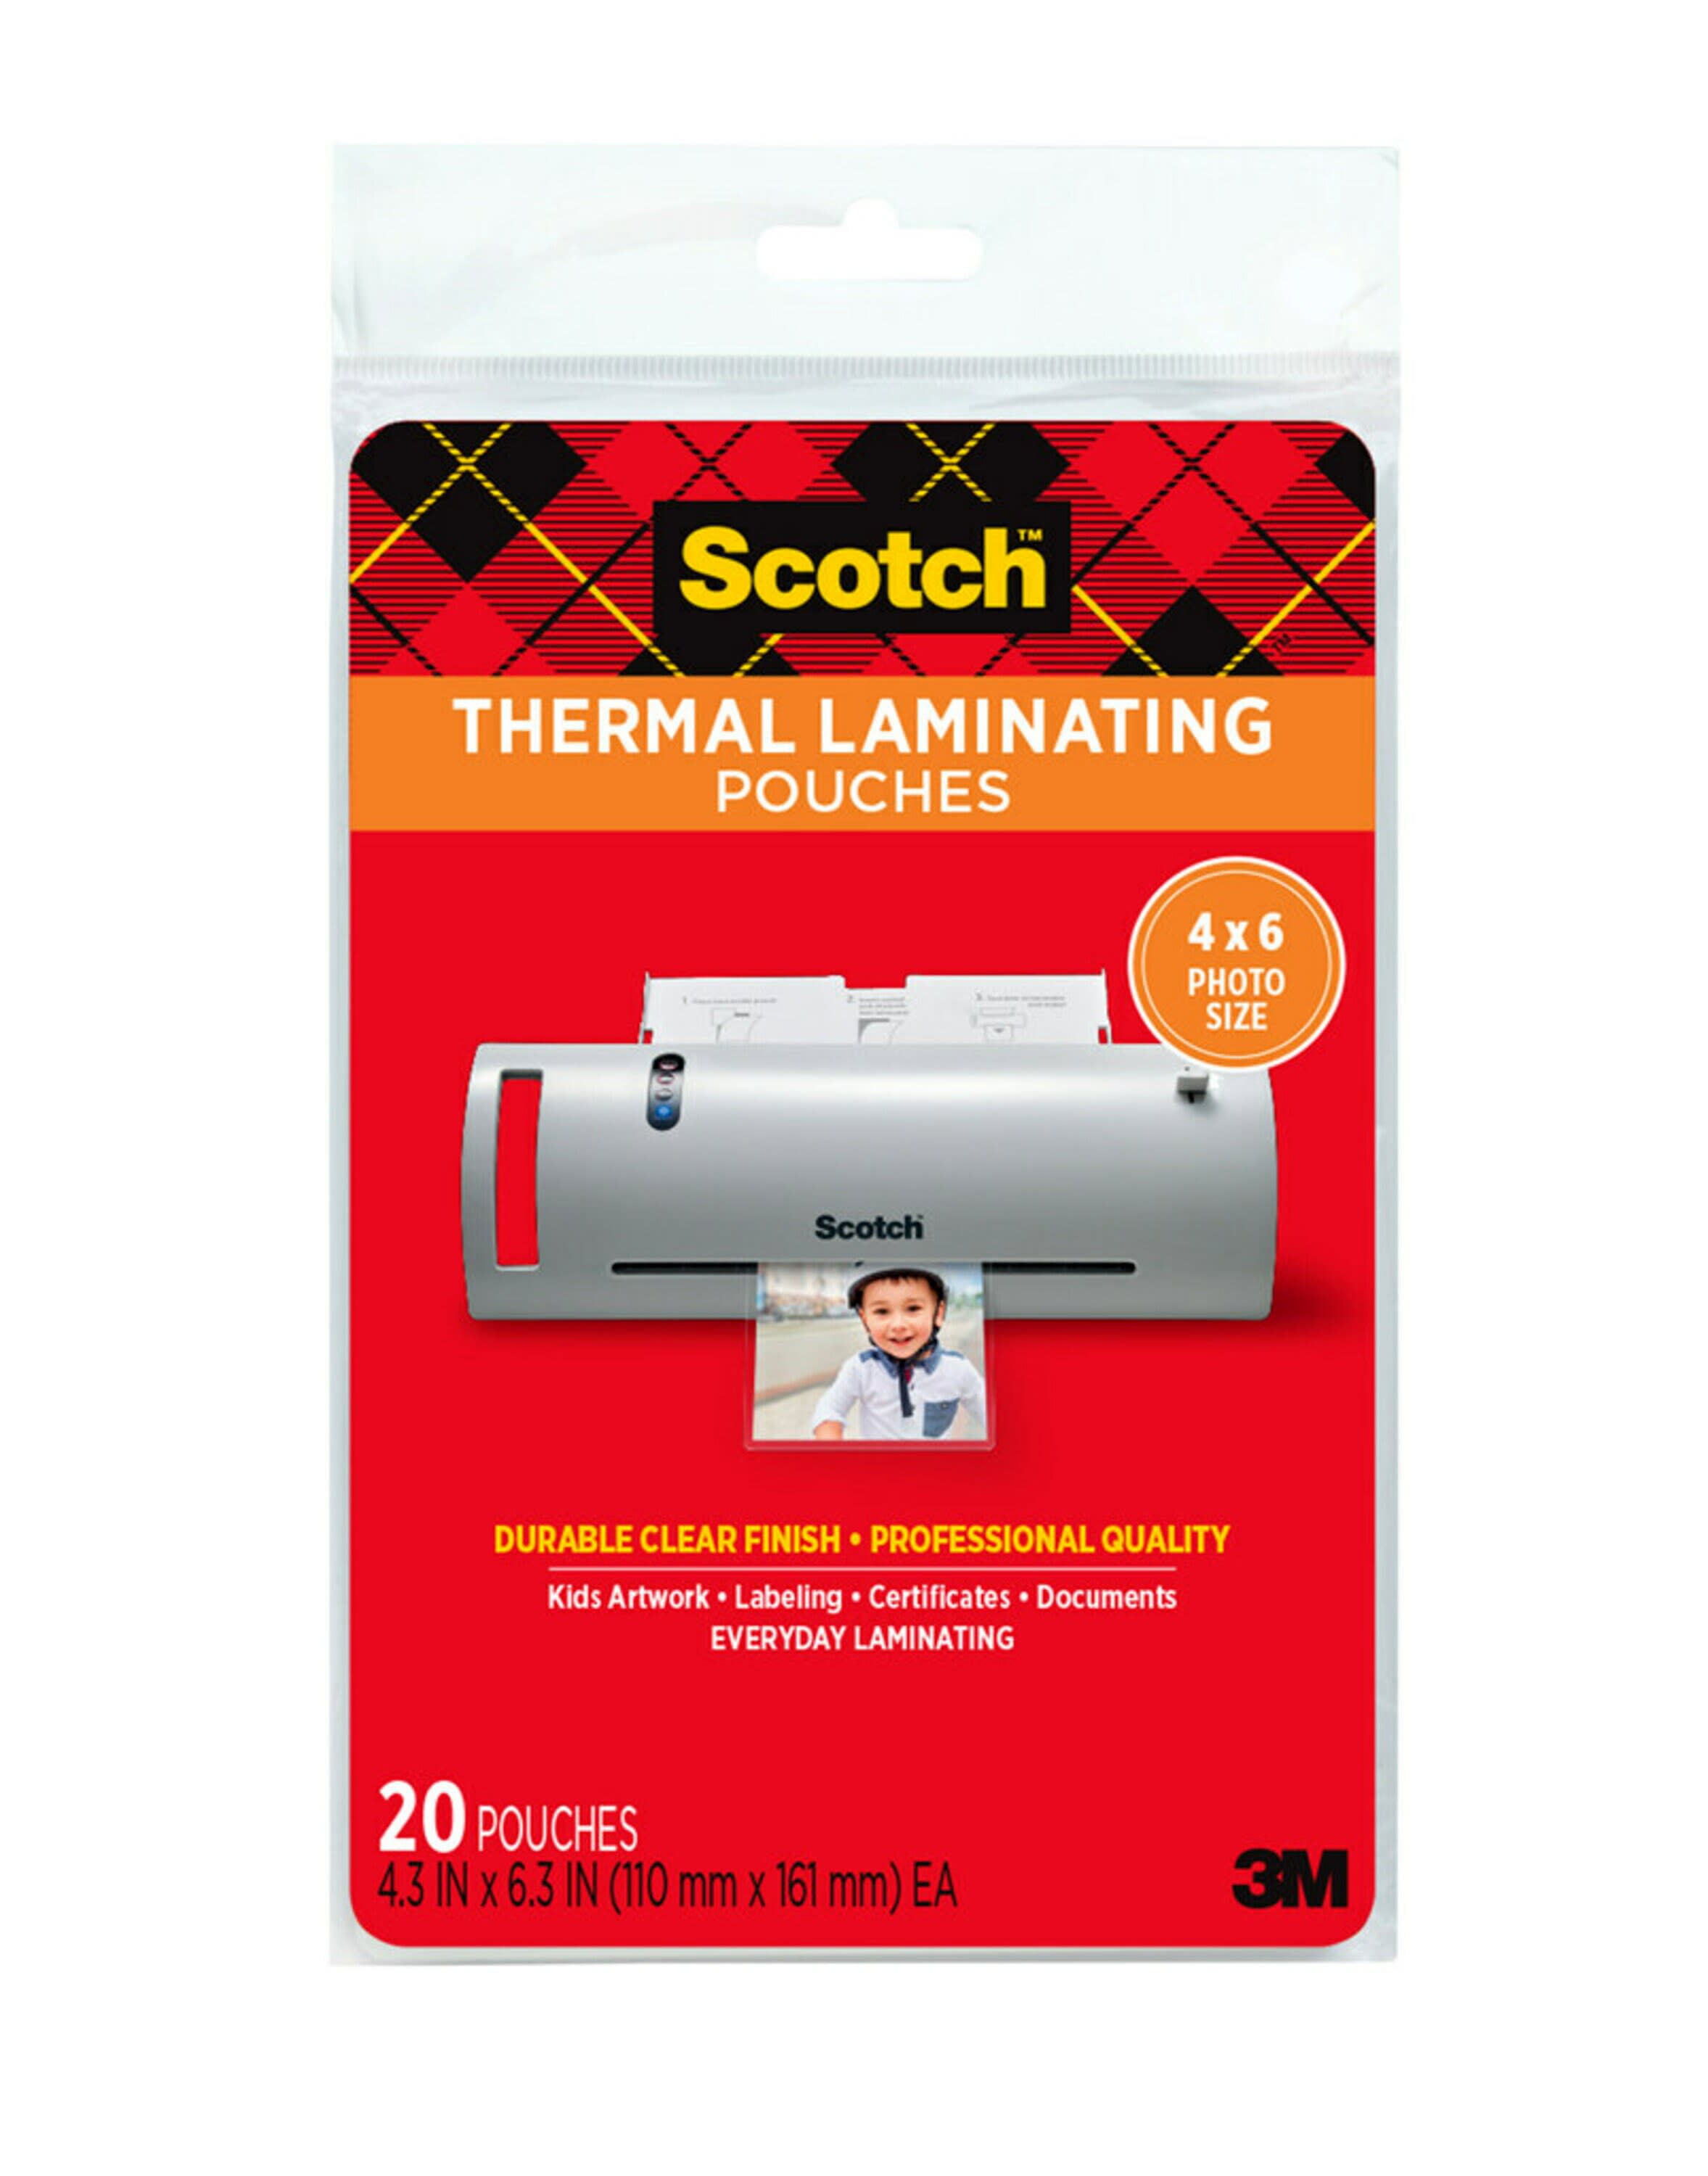 PK 100 A5 Laminating Pouches Film 150 Micron Gloss -Buy 2 packs get $5 off